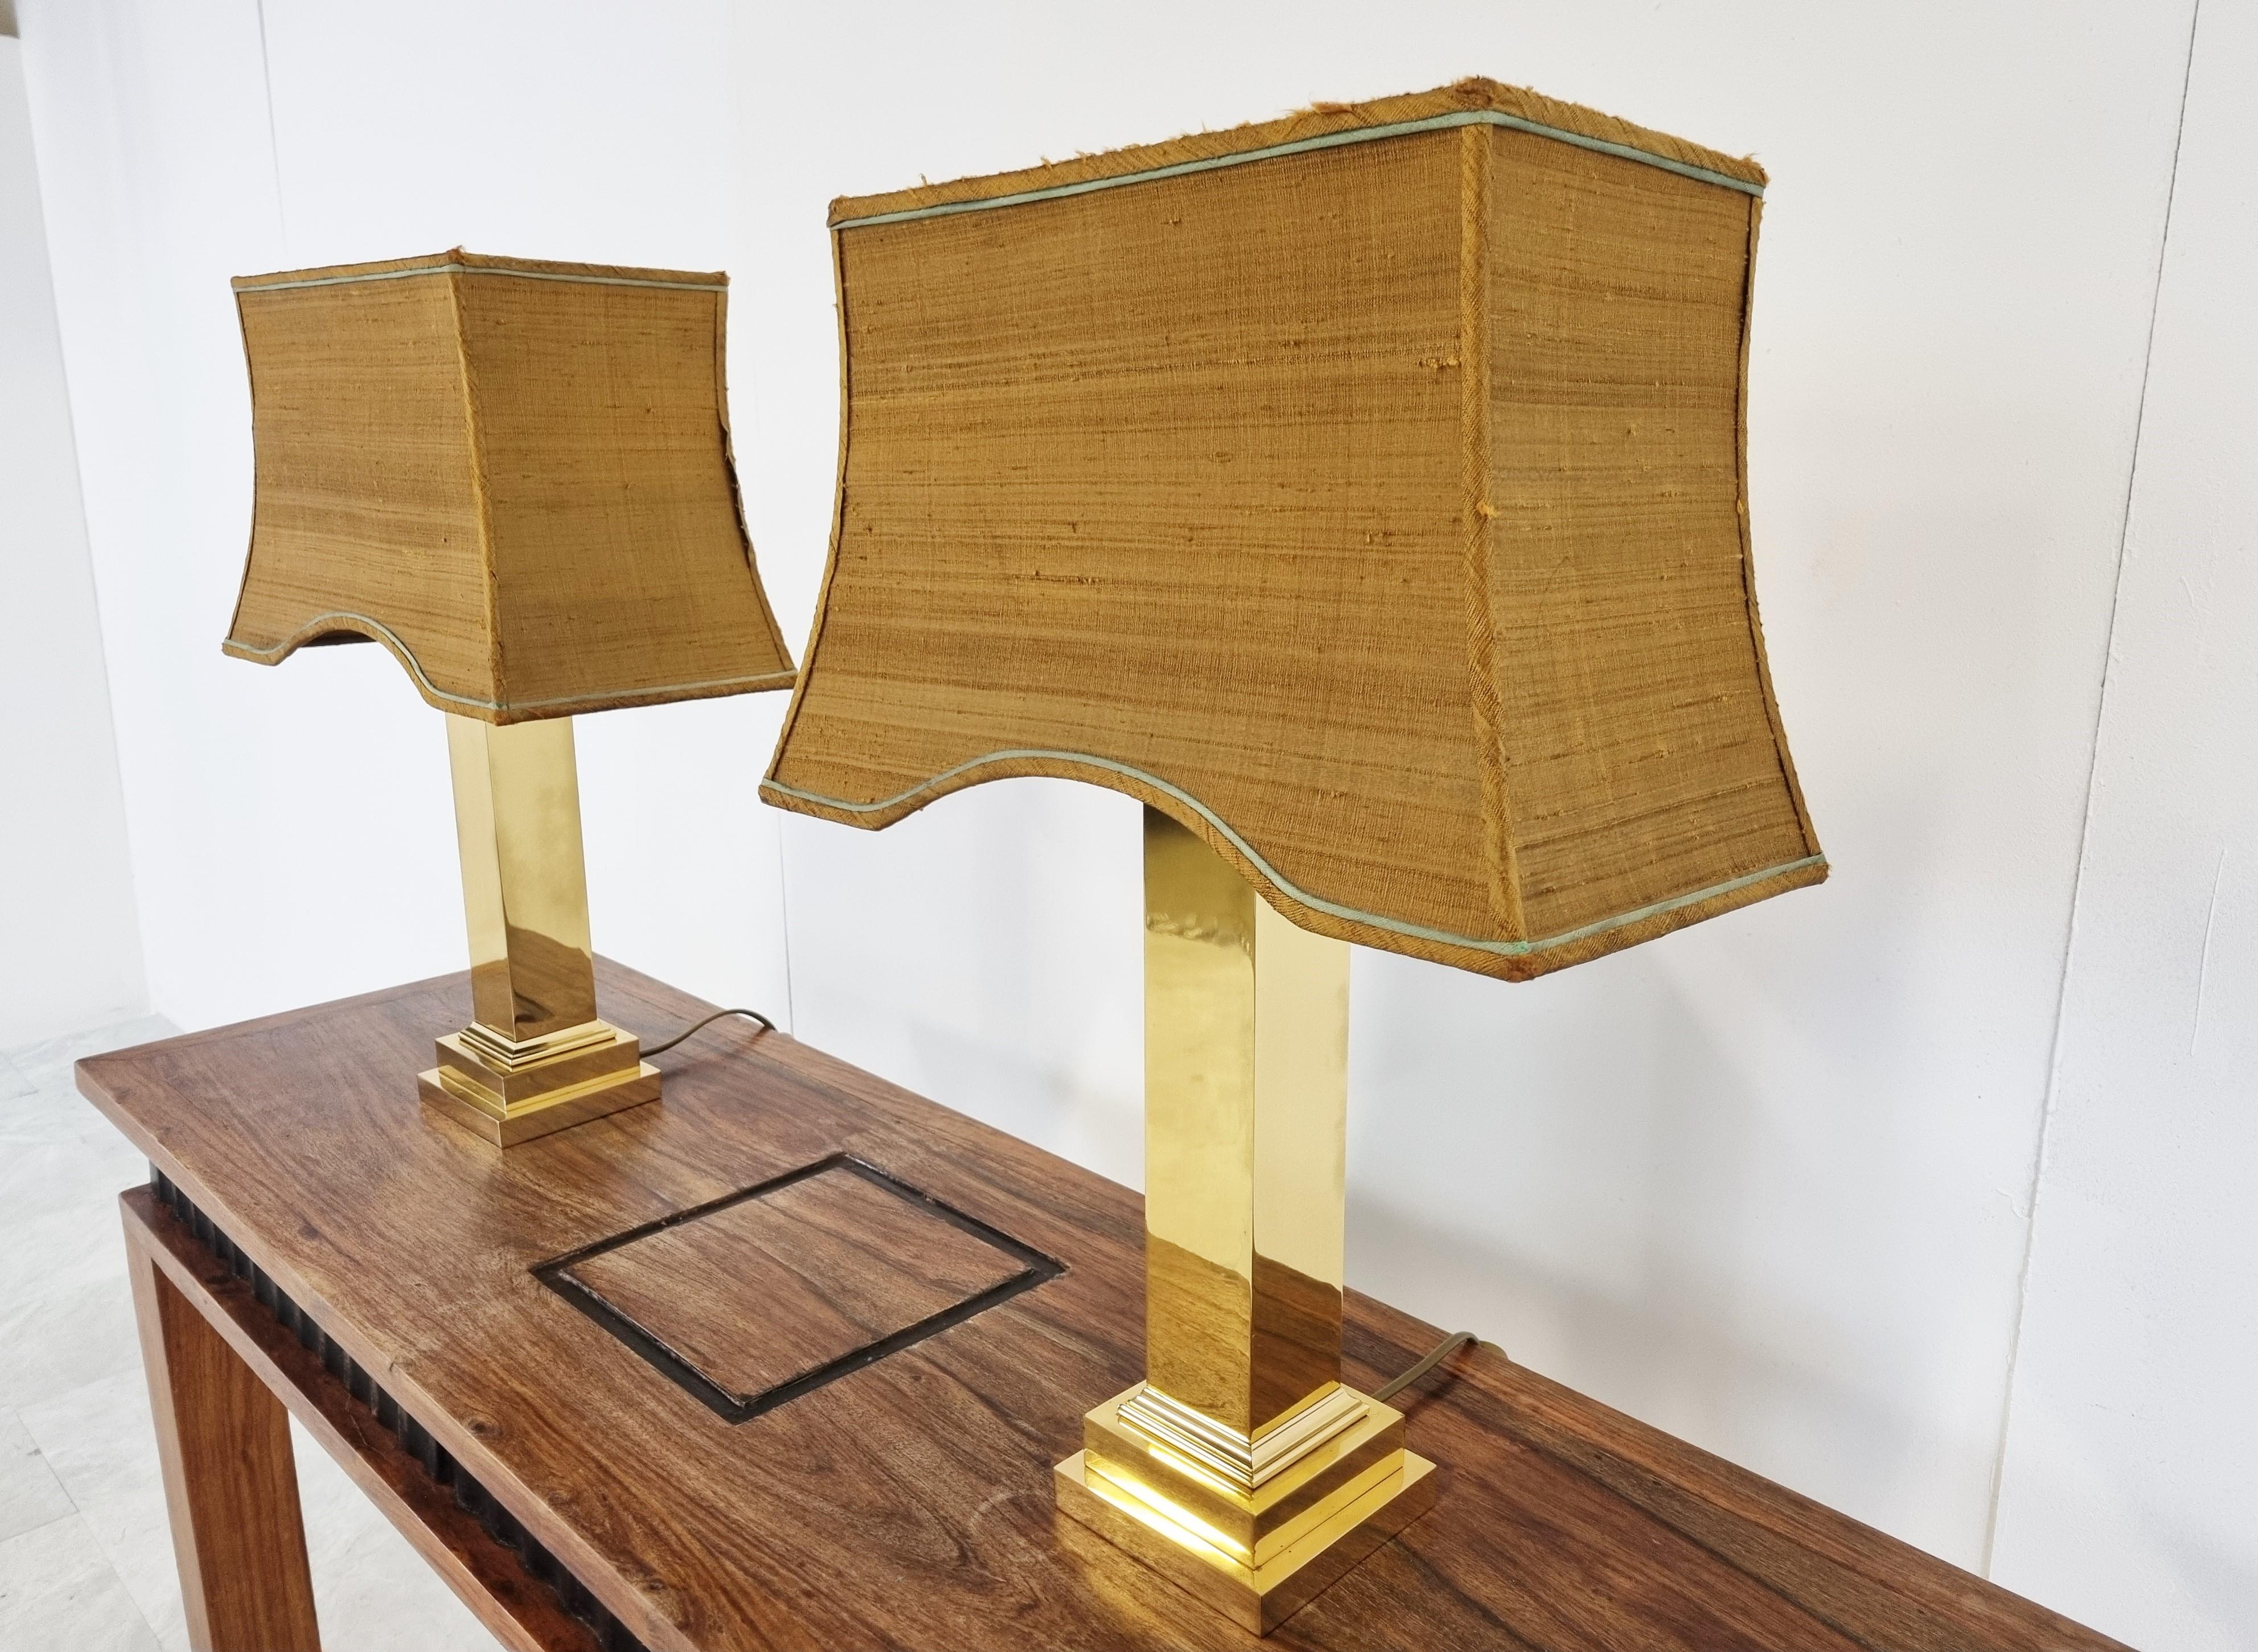 Pair of vintage brass table lamps by Belgochrom.

Timeless design lamps.

Good condition, tested and ready for use with a regular E26/E27 light bulb.

1970s - Belgium

Dimensions:
Height: 56 cm / 22.04